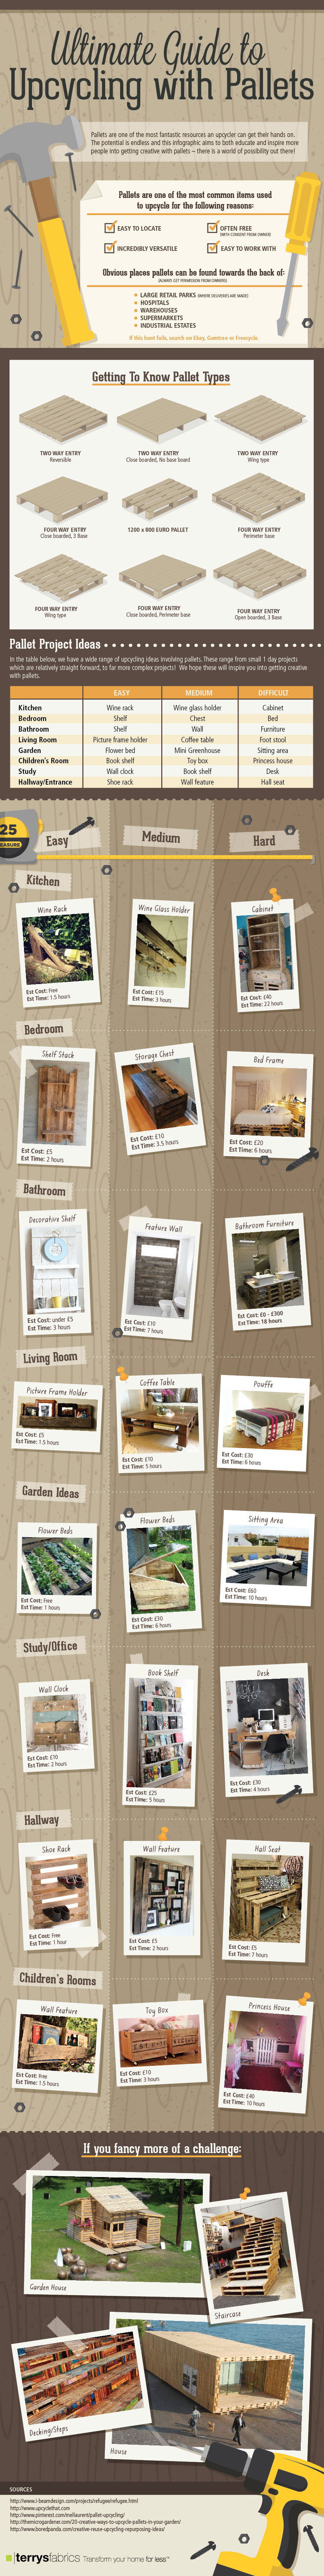 Ultimate Guide to Upcycling with Pallets - Infograph featured on WWW.JENNABURGER.COM